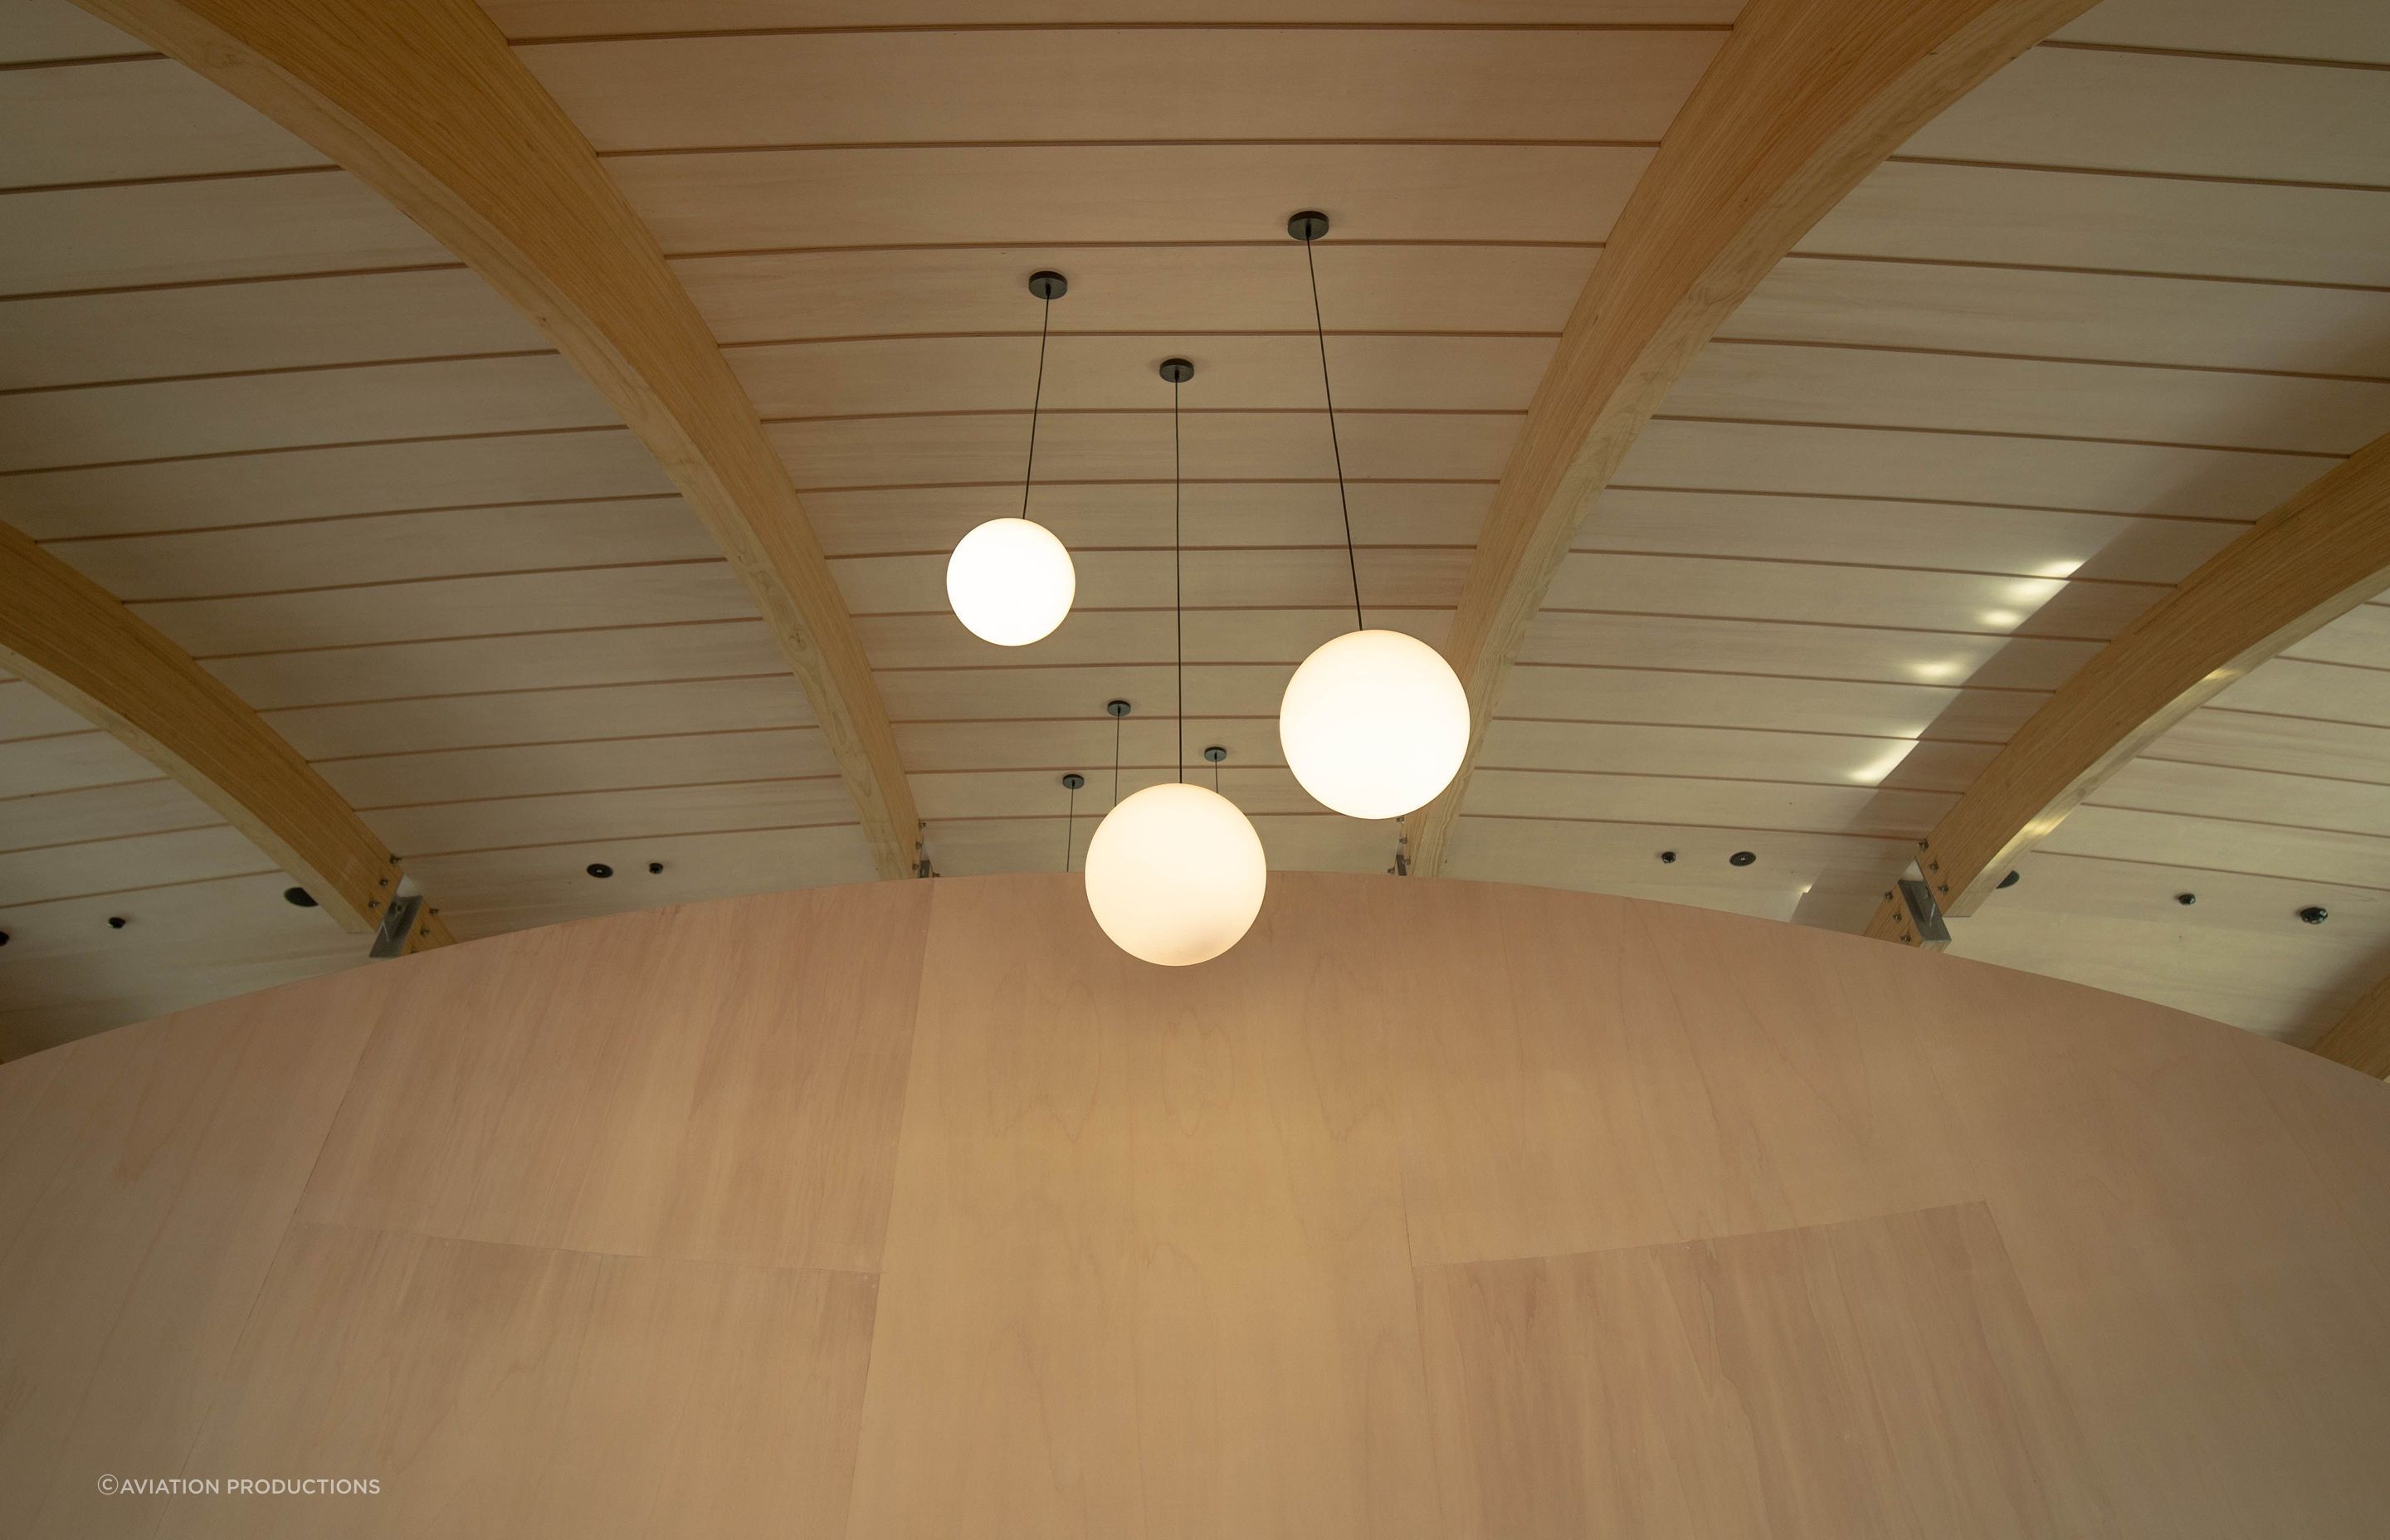 The plywood interior creates a warm and enveloping space.